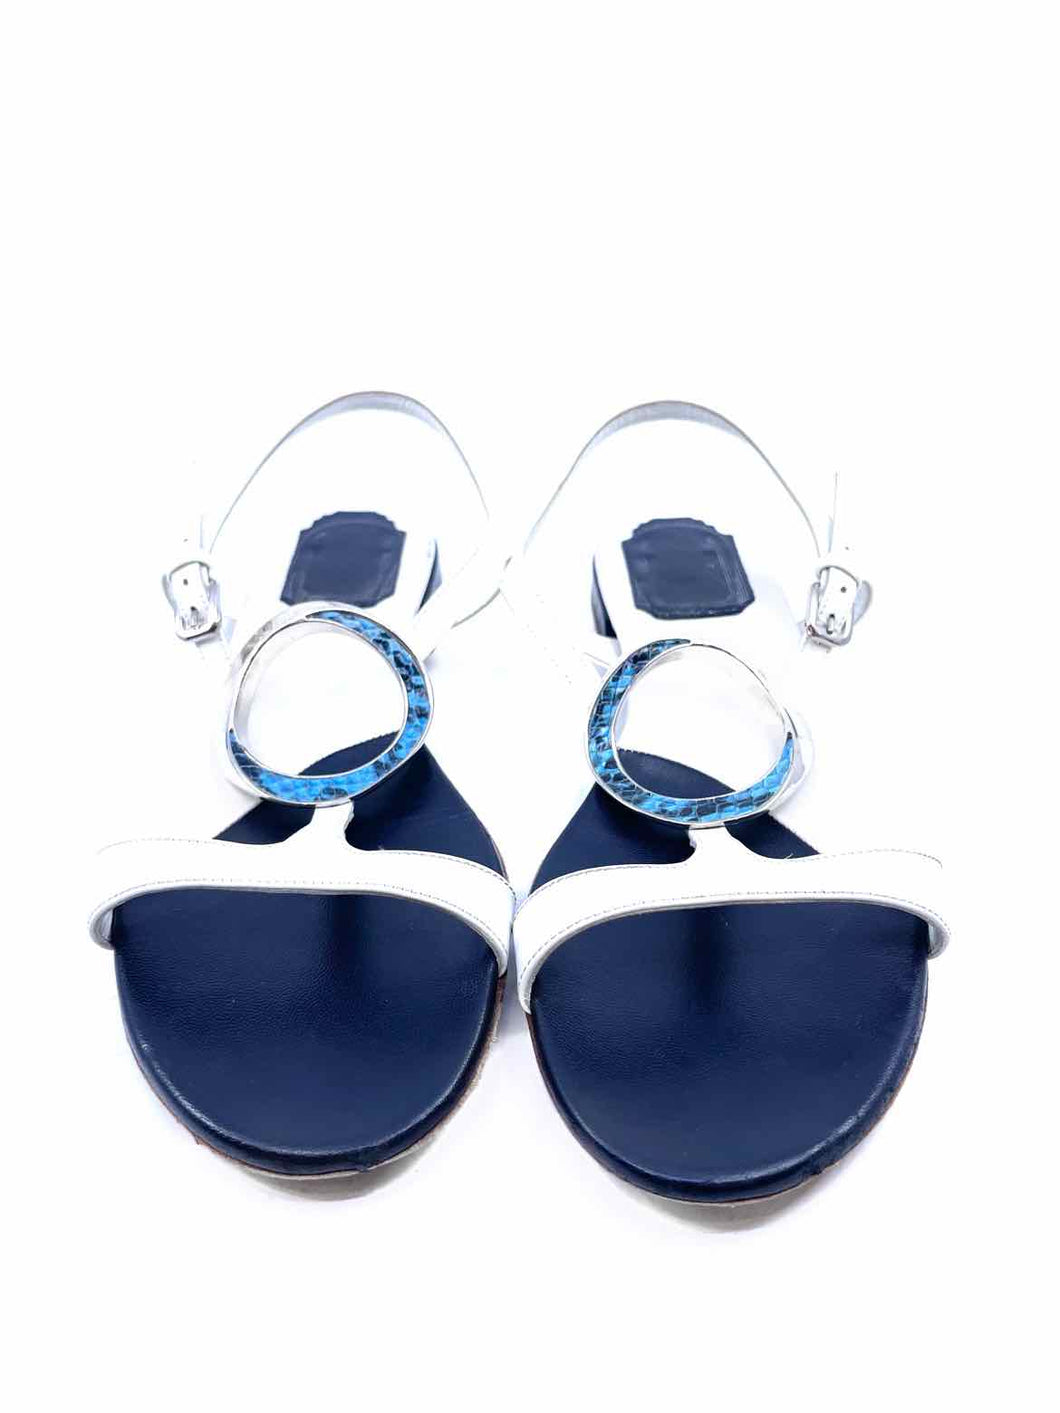 CHRISTIAN DIOR Size 7 Navy, White Leather Solid Sandals